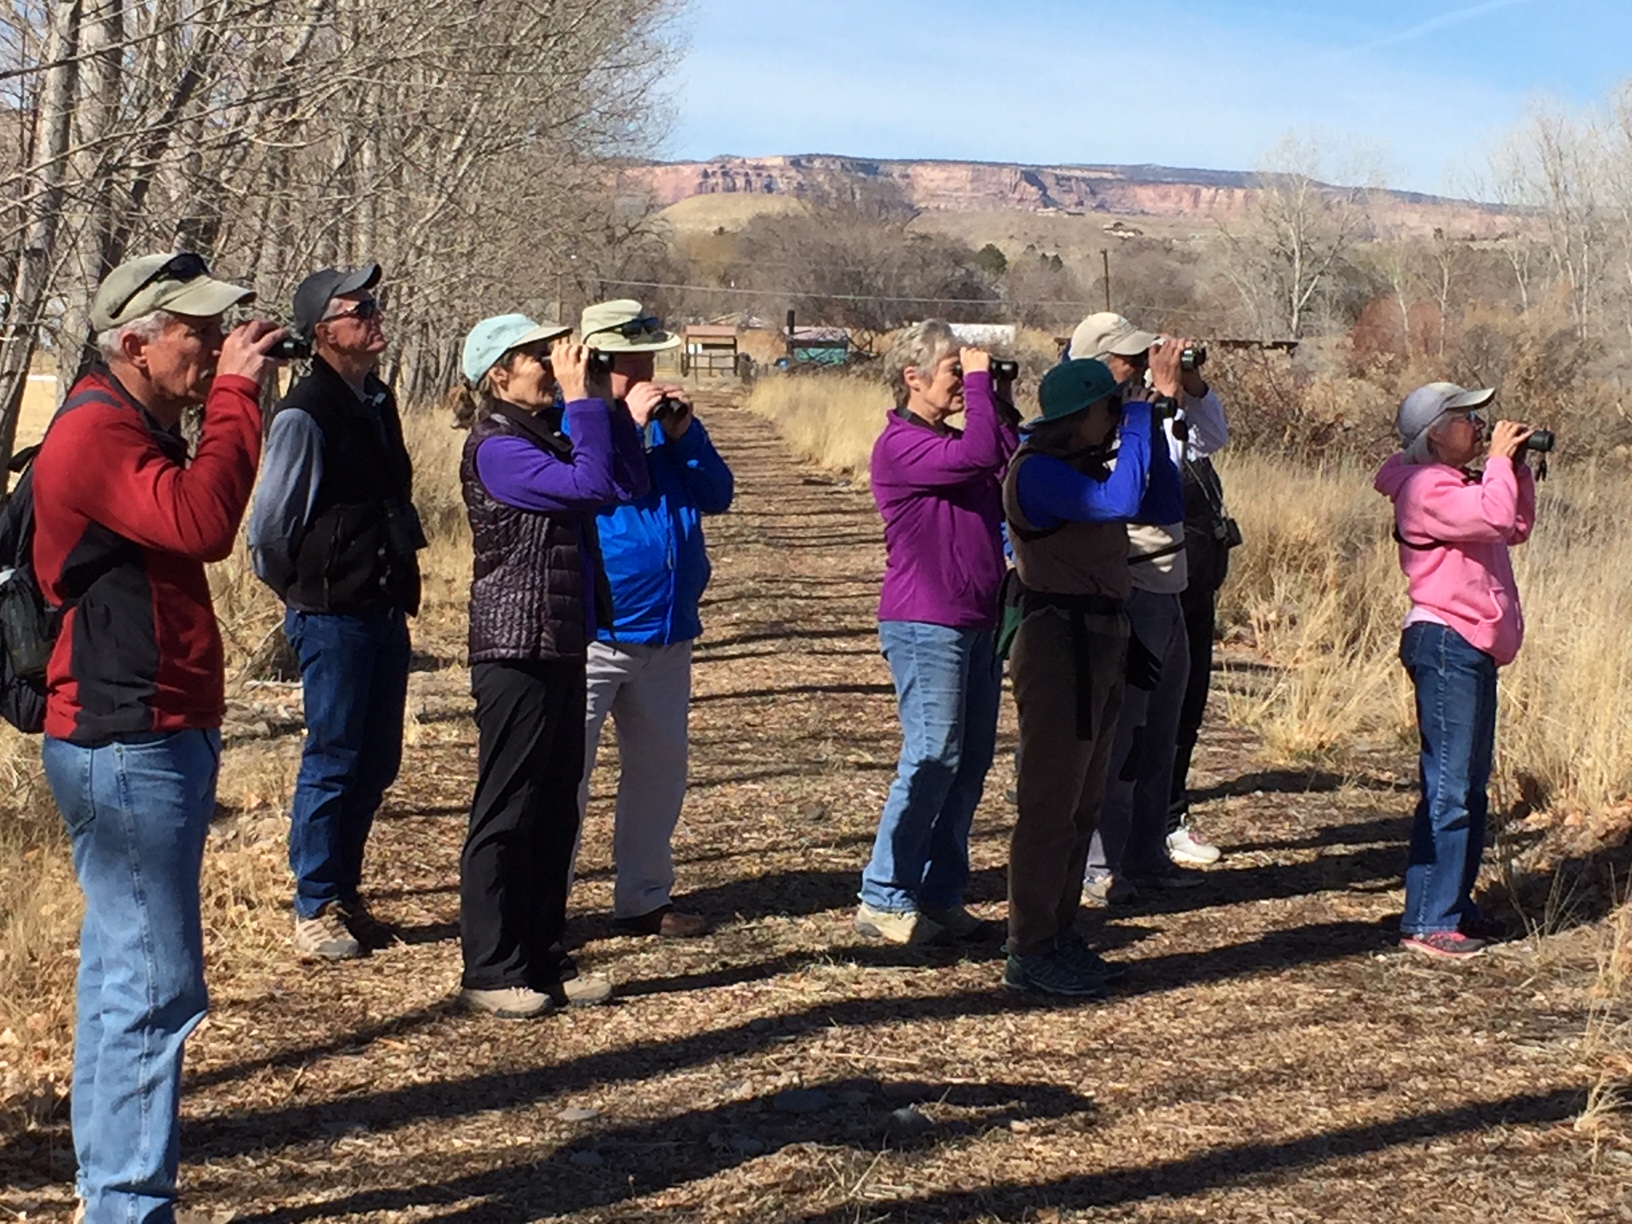 Beginning Birding with Cary Atwood, new dimensions participants with binoculars viewing birds